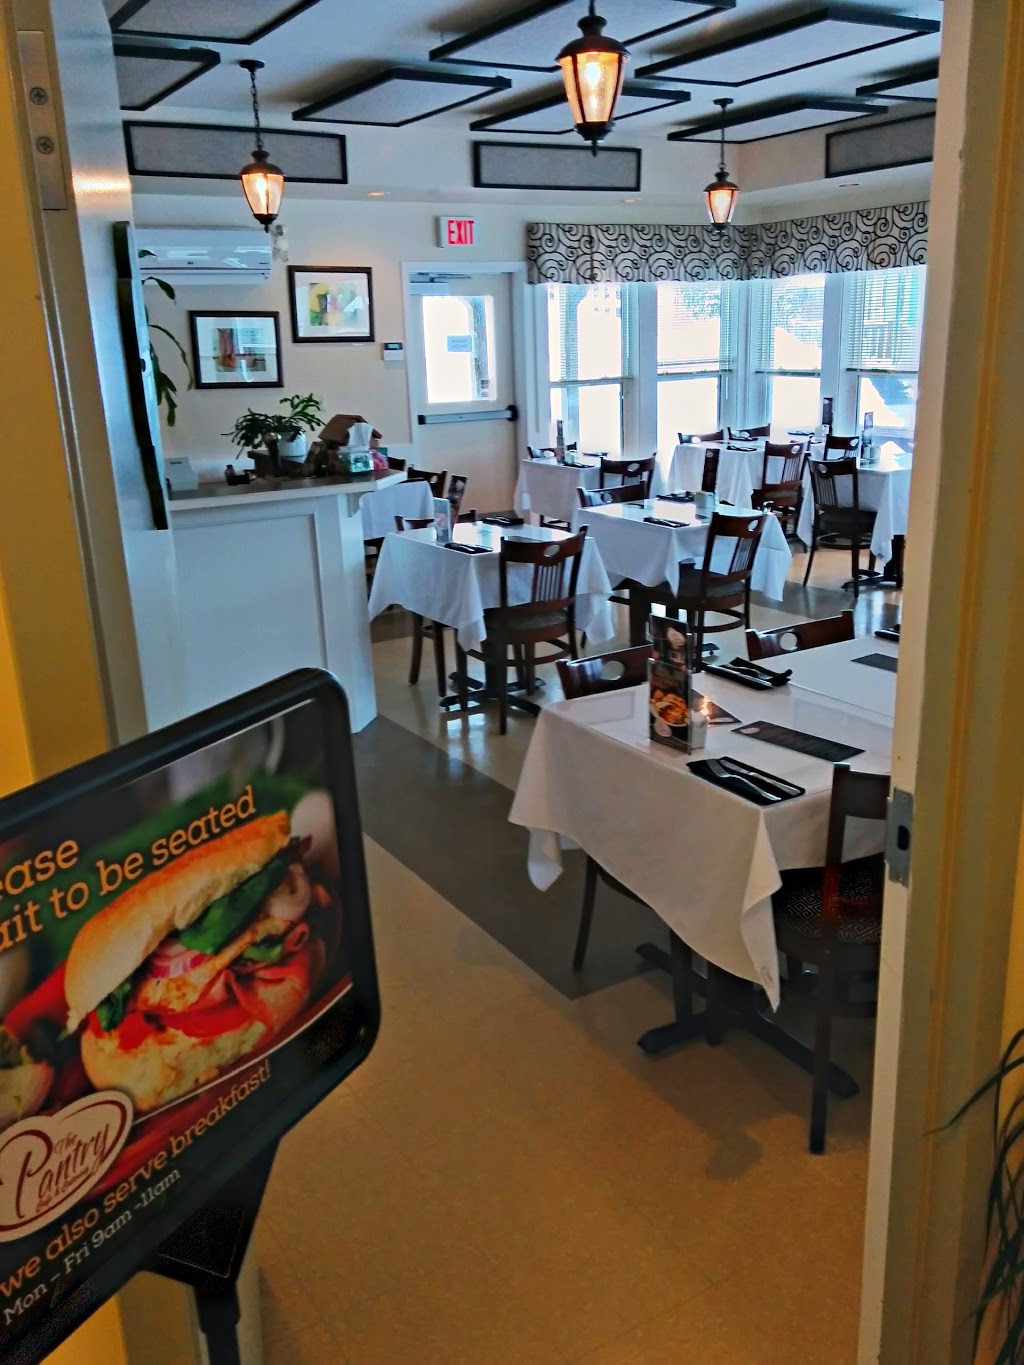 The Pantry Café and Catering | cafe | Clinch Crescent, St. Johns, NL A1B 4E8, Canada | 7097228200 OR +1 709-722-8200